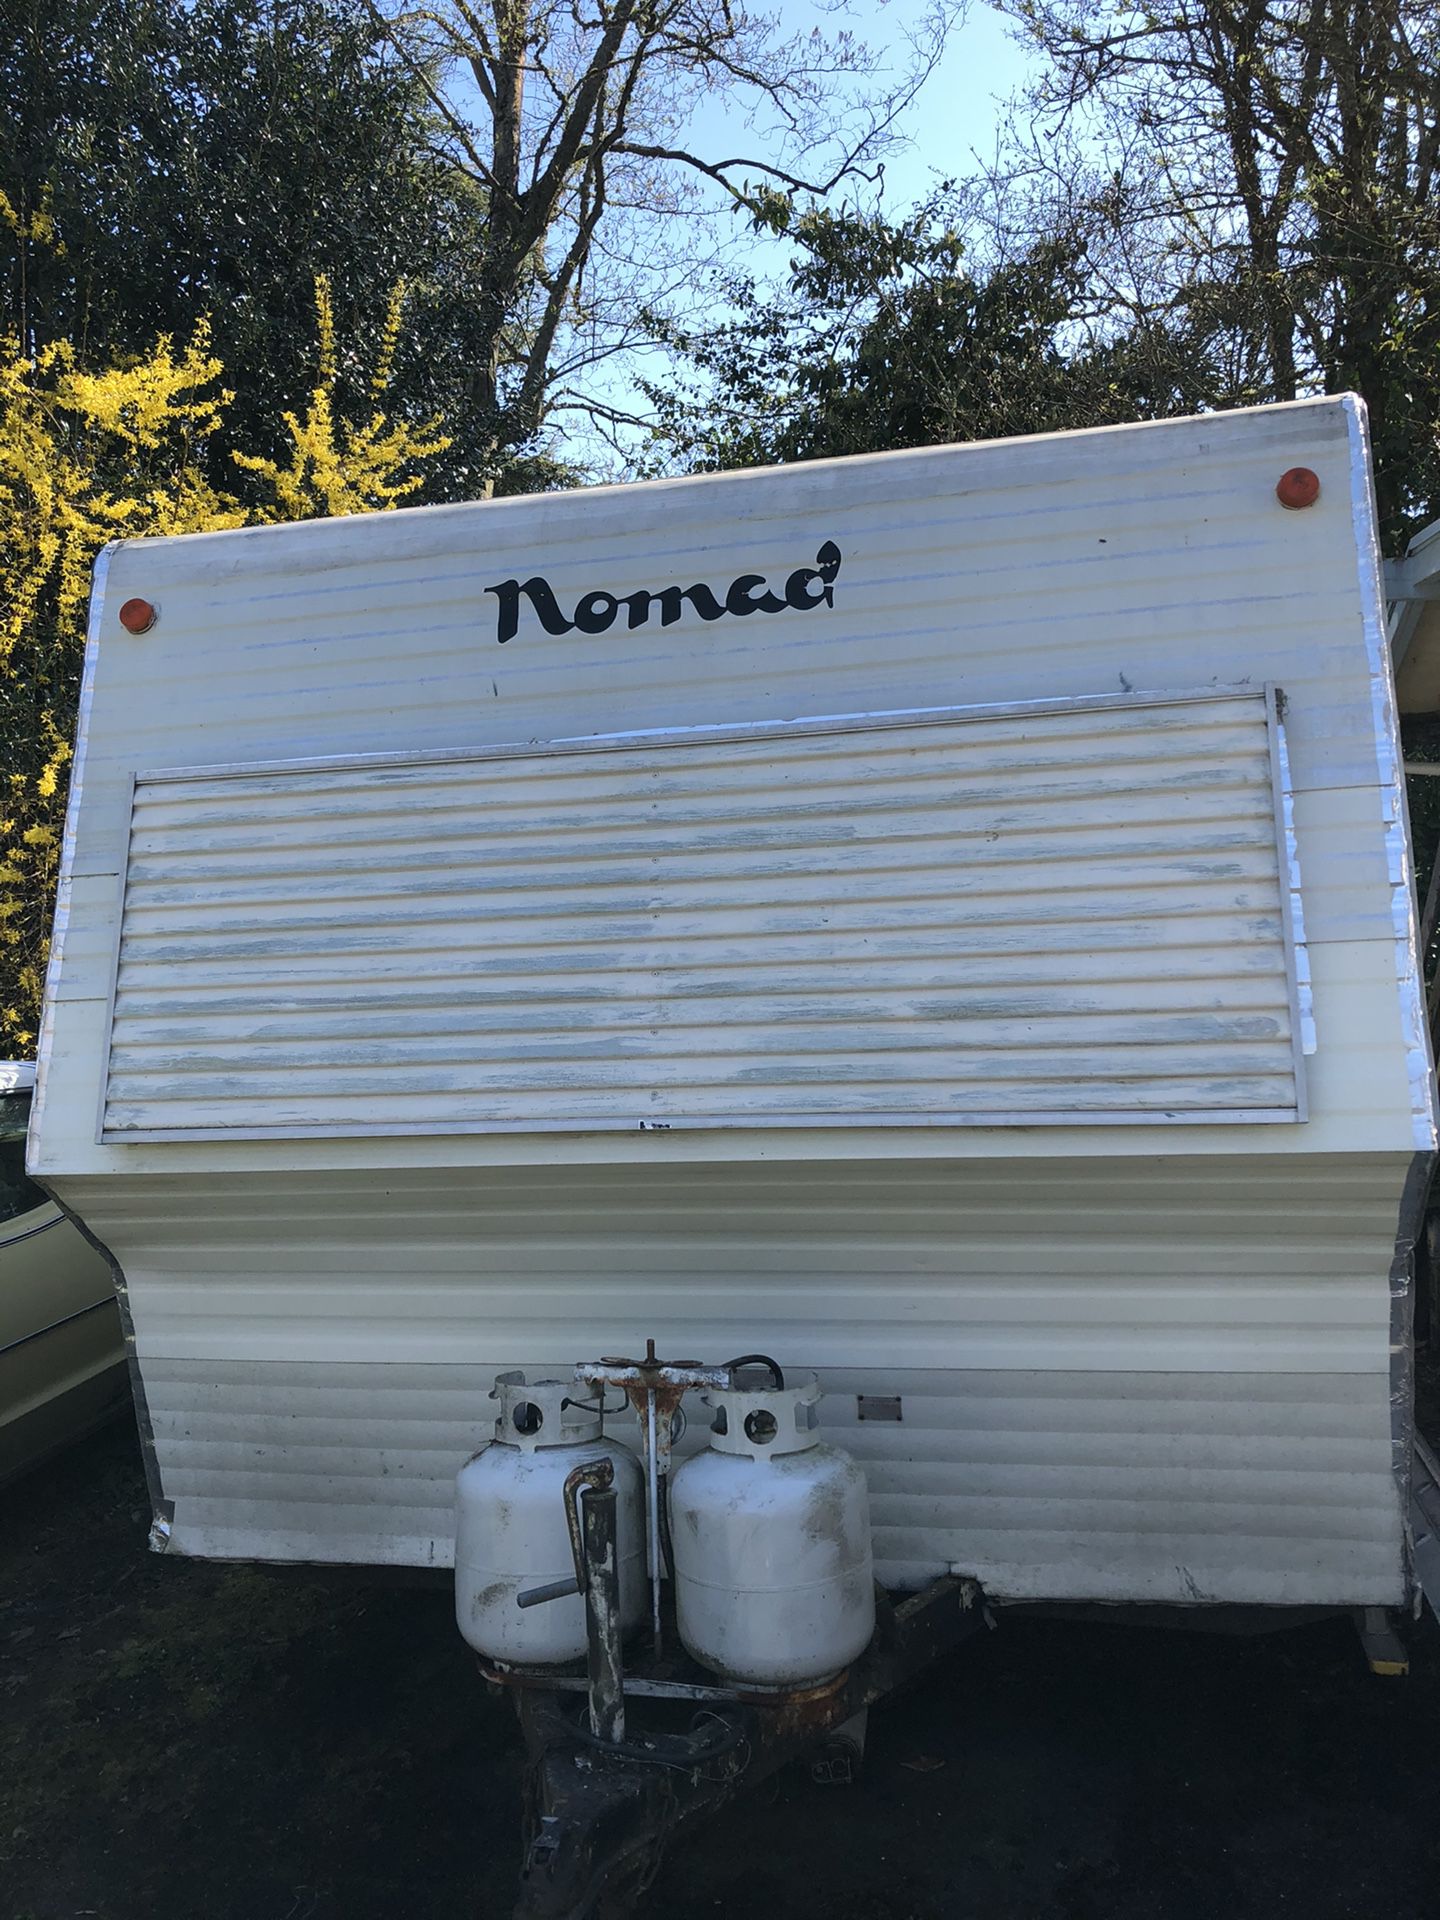 1969 Nomad travel trailer with load equalizing hitch